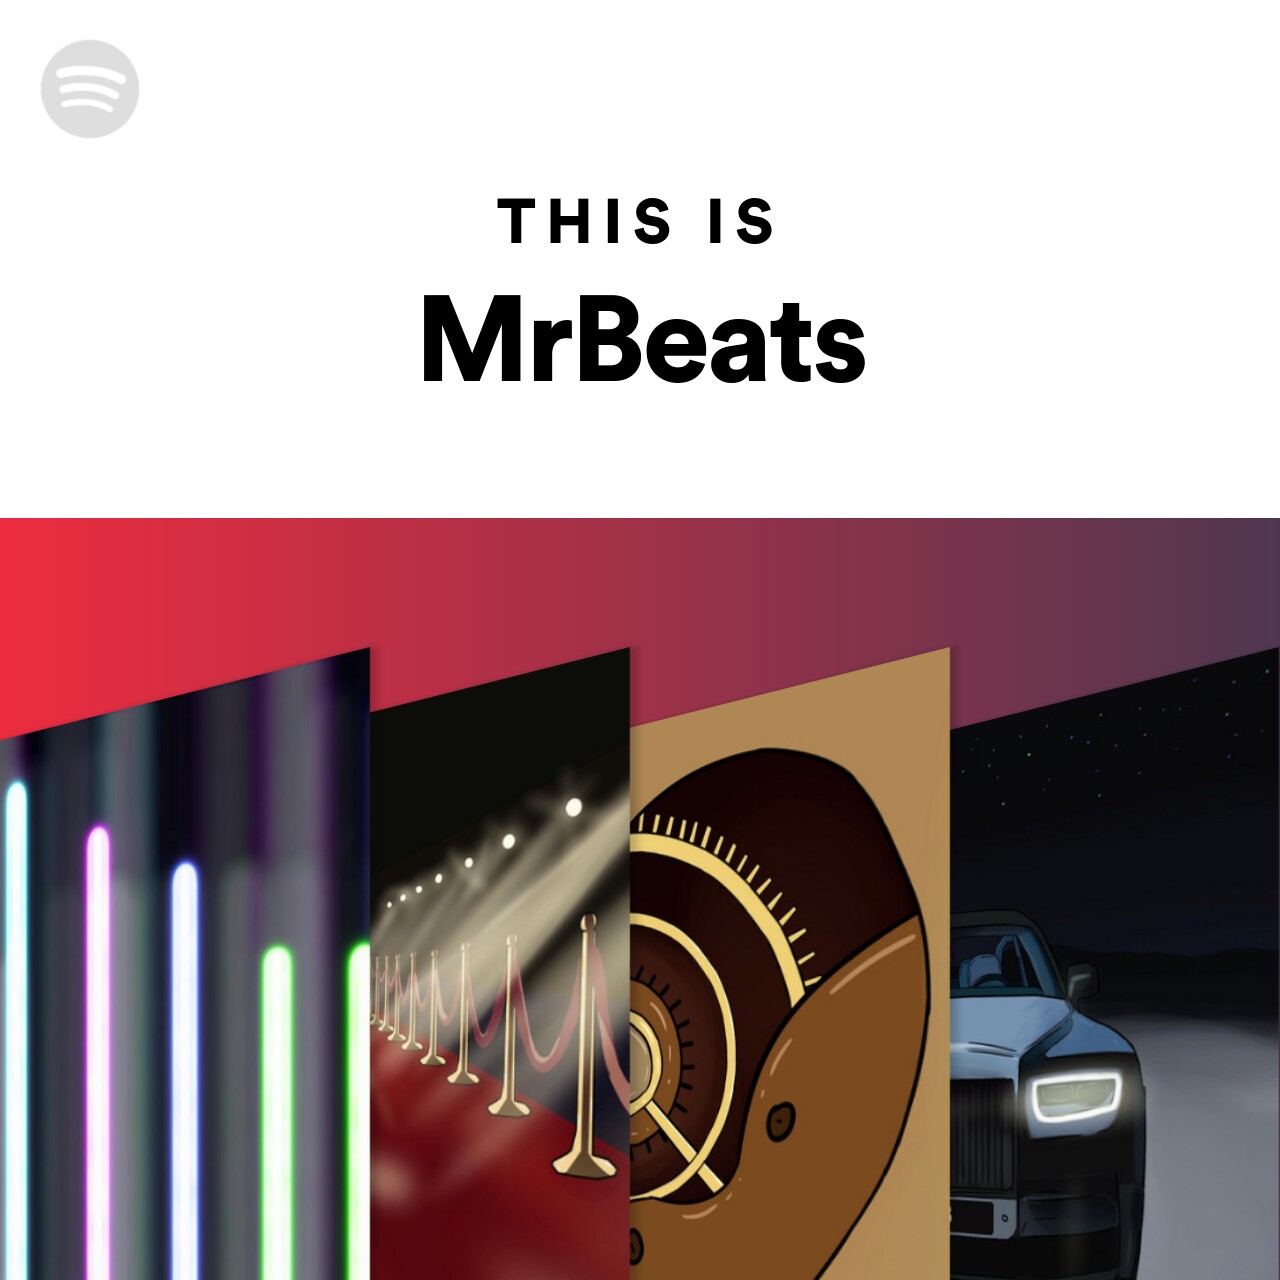 This Is MrBeats